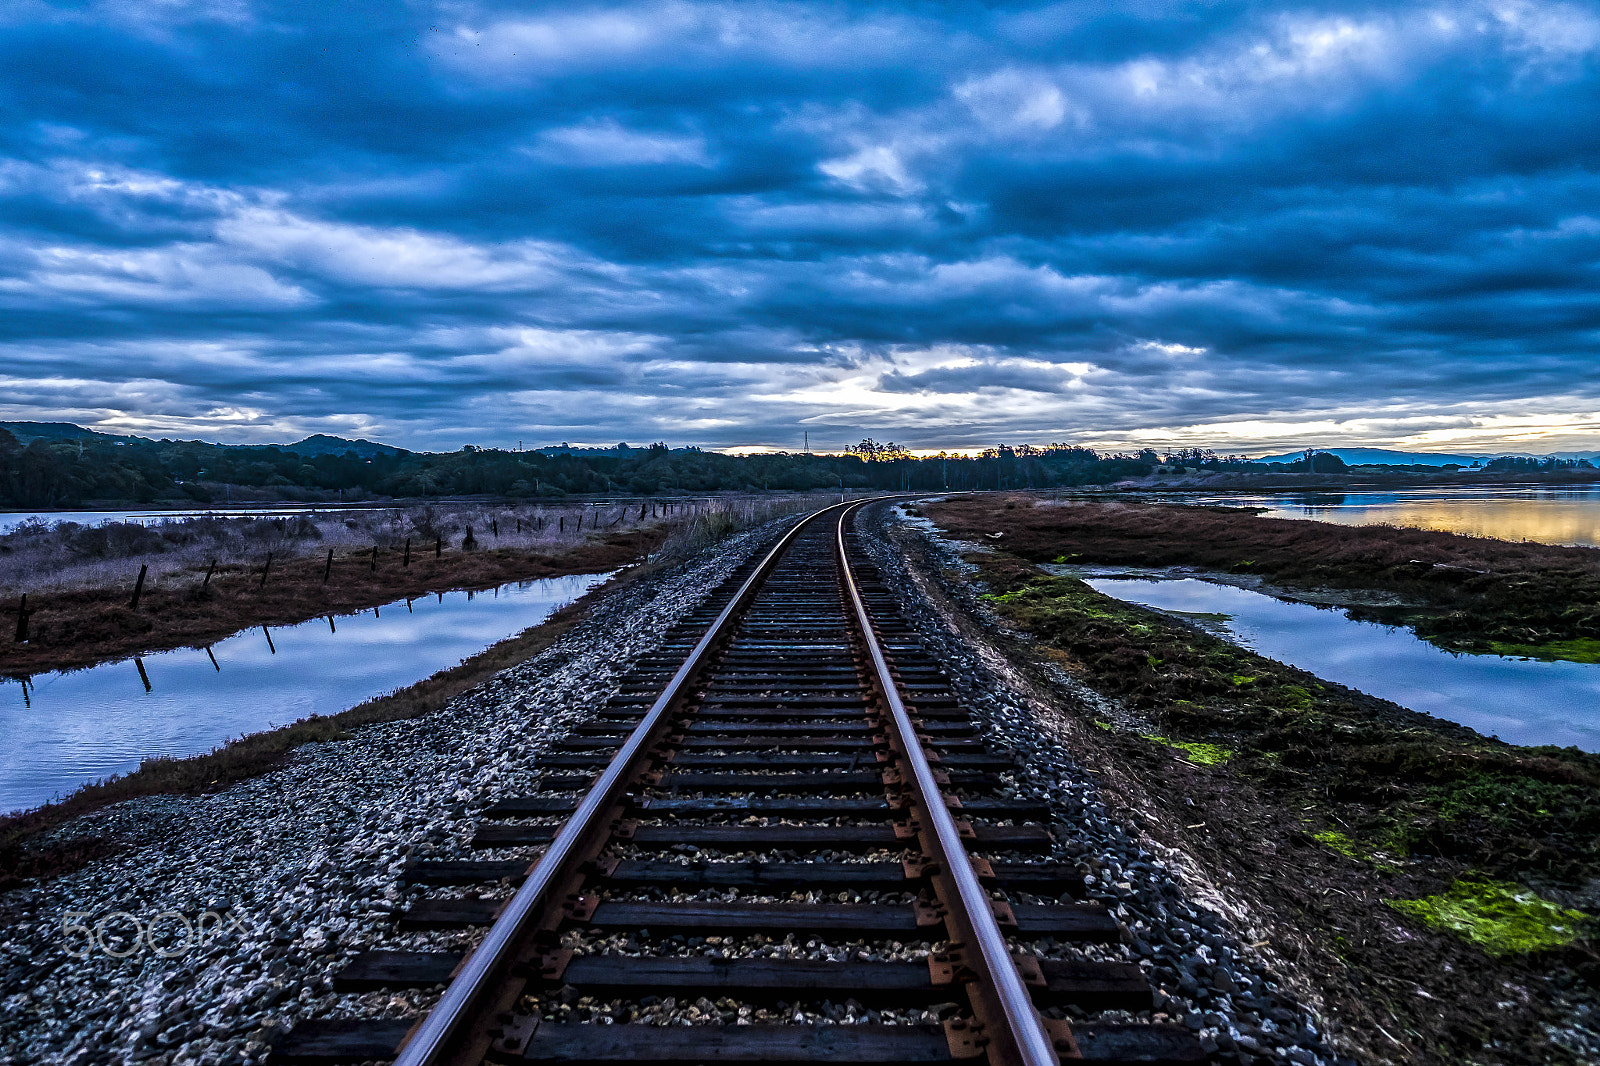 Fujifilm X-T1 + Fujifilm XF 16mm F1.4 R WR sample photo. Down the tracks at elkhorn slough on a cloudy day photography